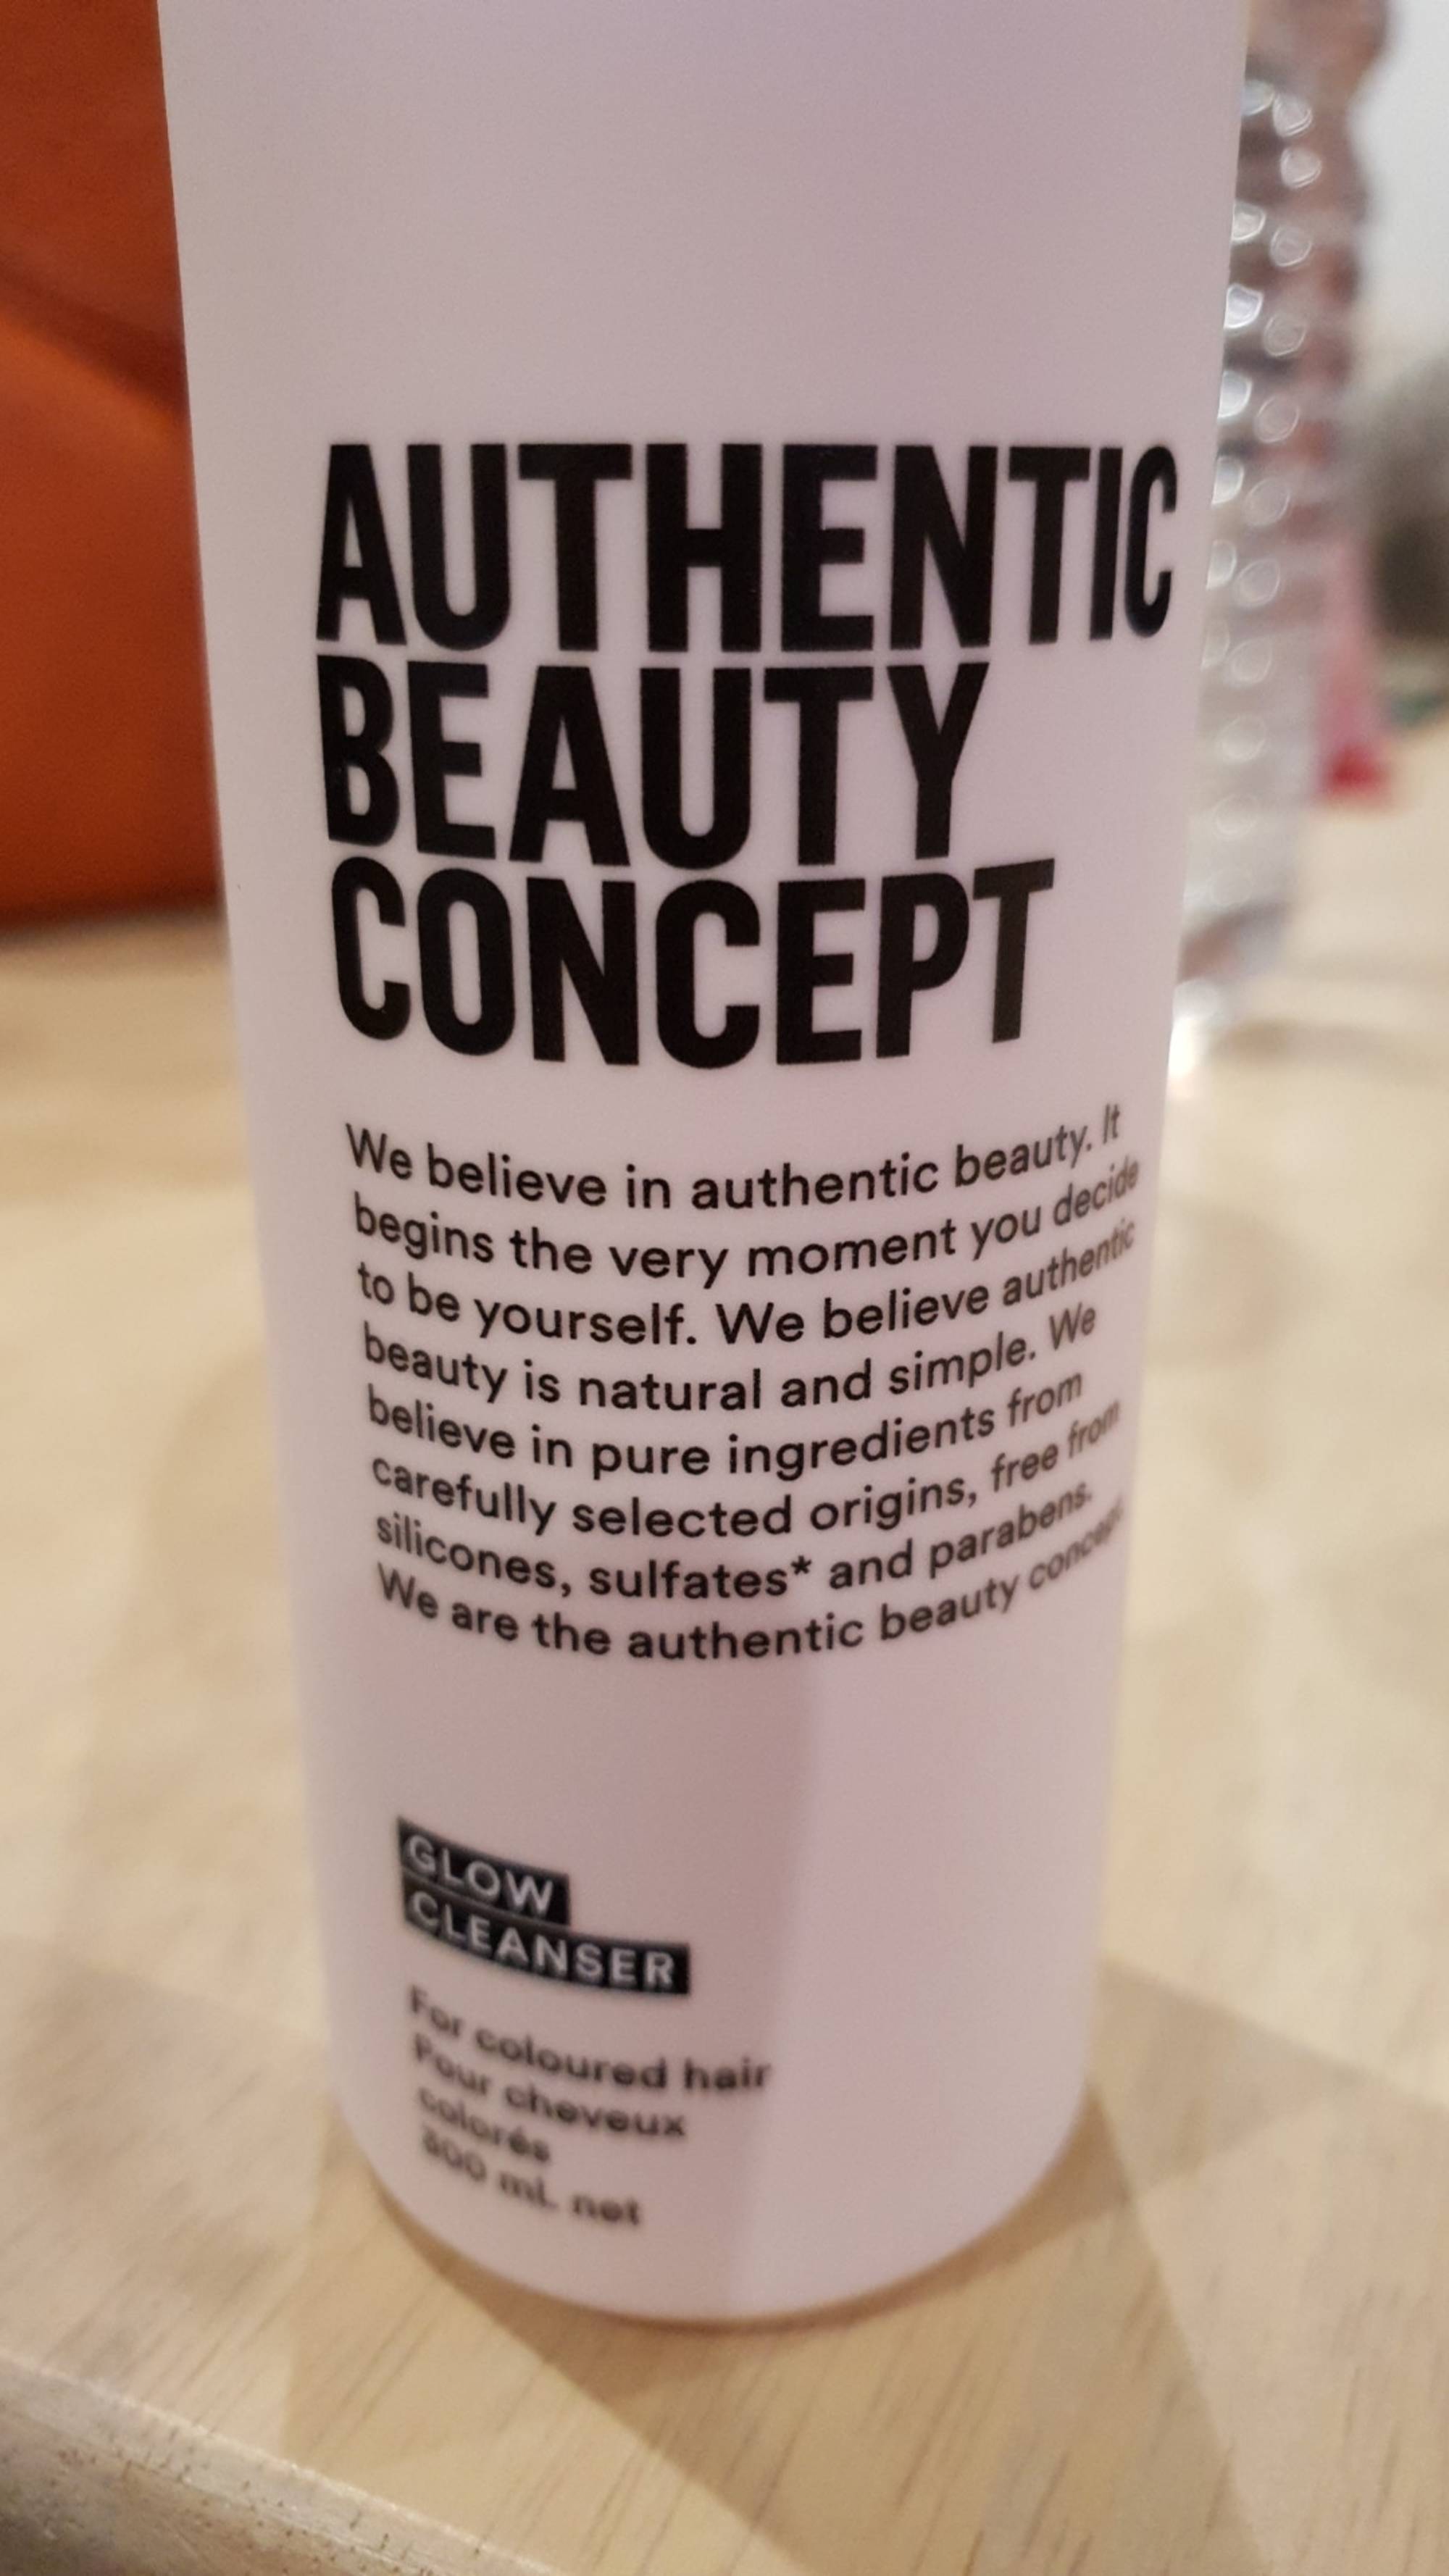 AUTHENTIC BEAUTY CONCEPT - Glow cleanser